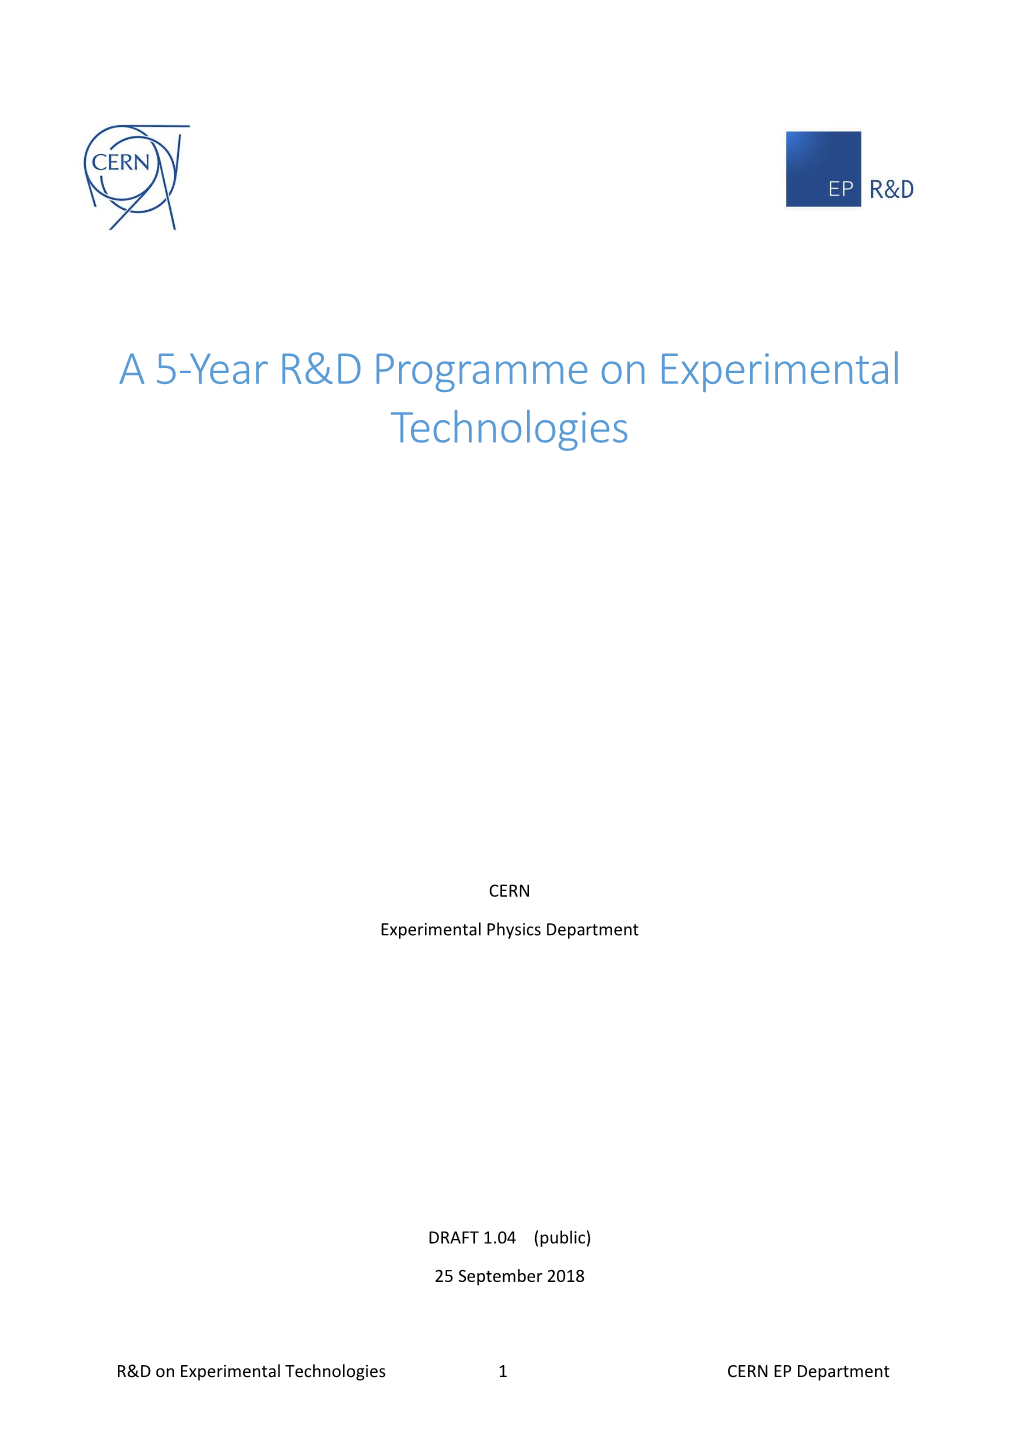 A 5-Year R&D Programme on Experimental Technologies